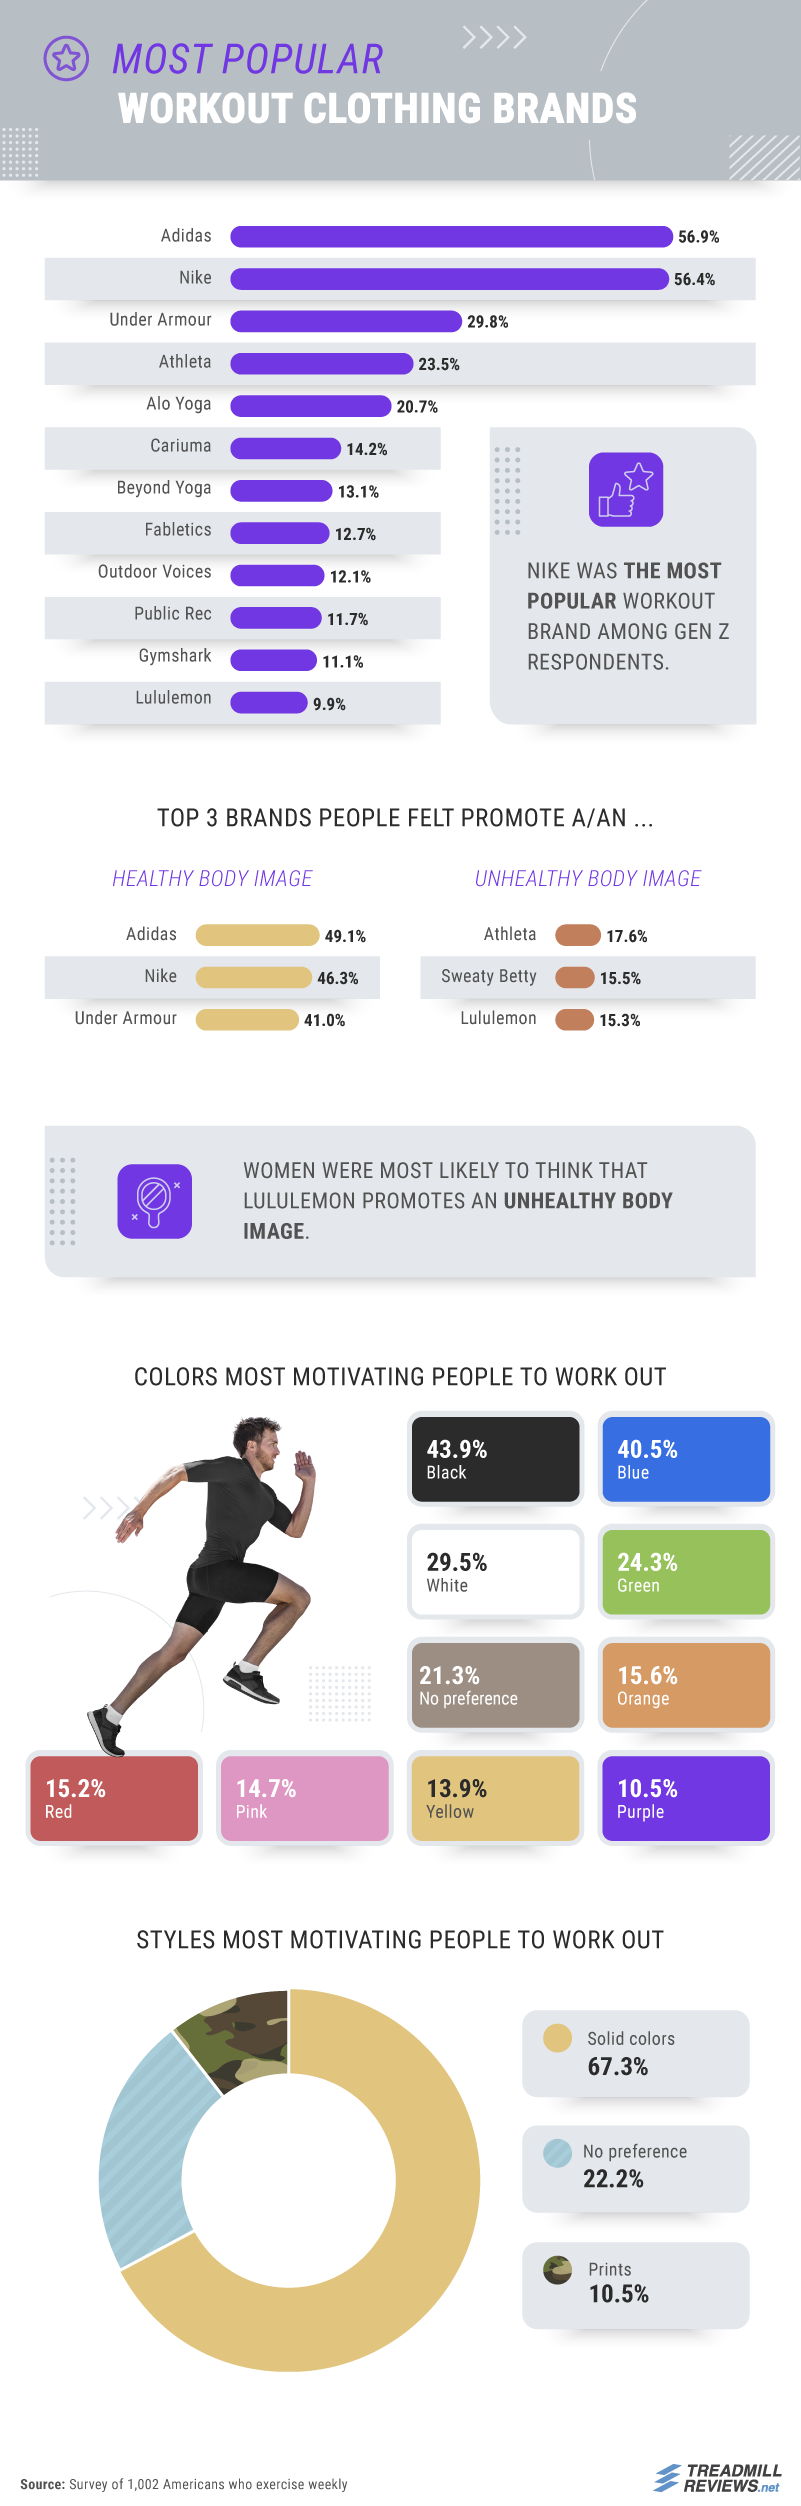 Most popular workout clothing brands